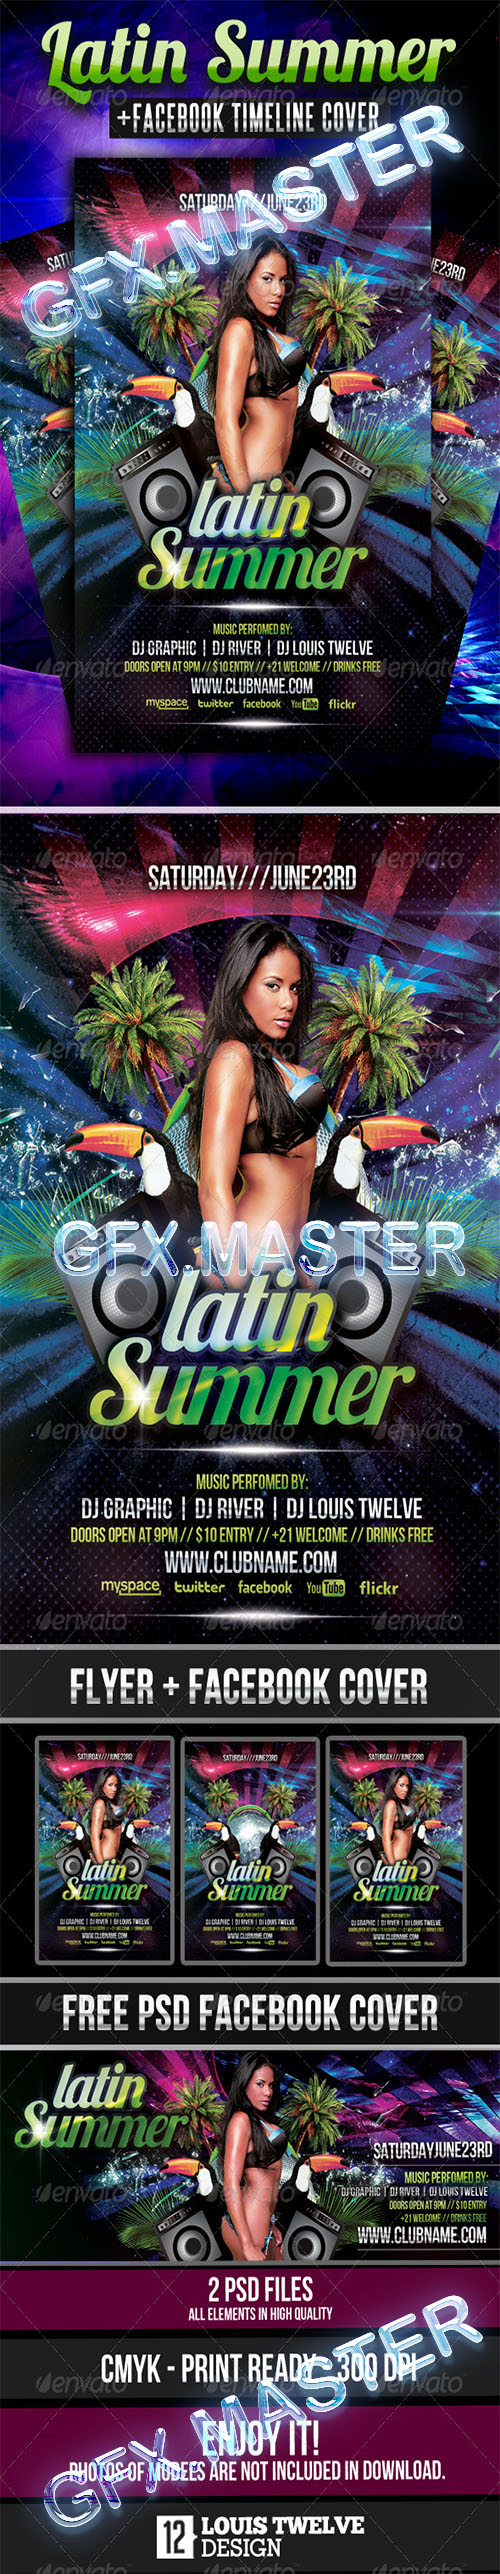 GraphicRiver - Latin Summer #2 Party Flyer + Facebook Cover